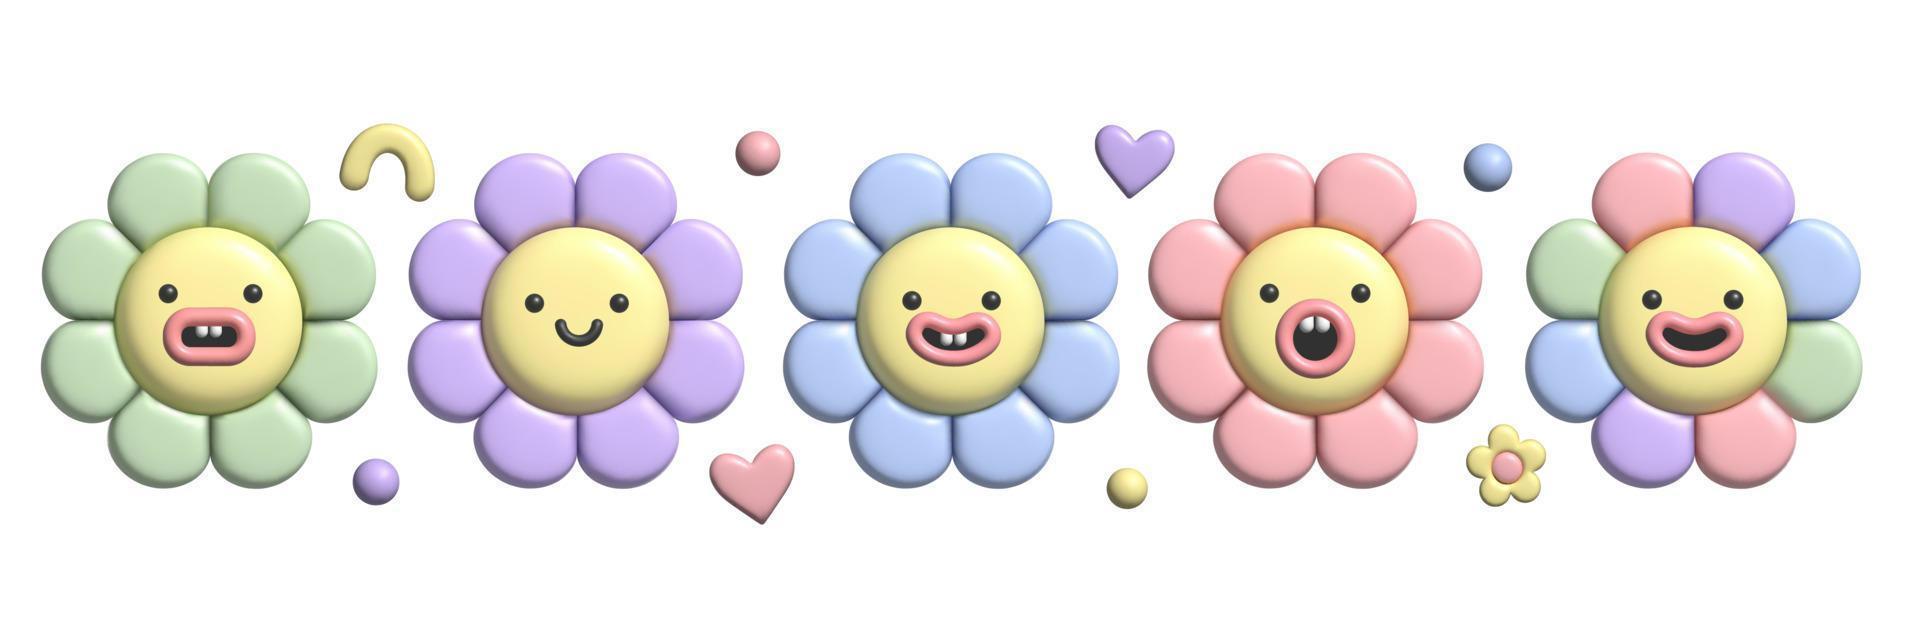 3D pastel flower set with plasticine effect. Y2k cute smile daisy stickers in trendy plastic style. vector